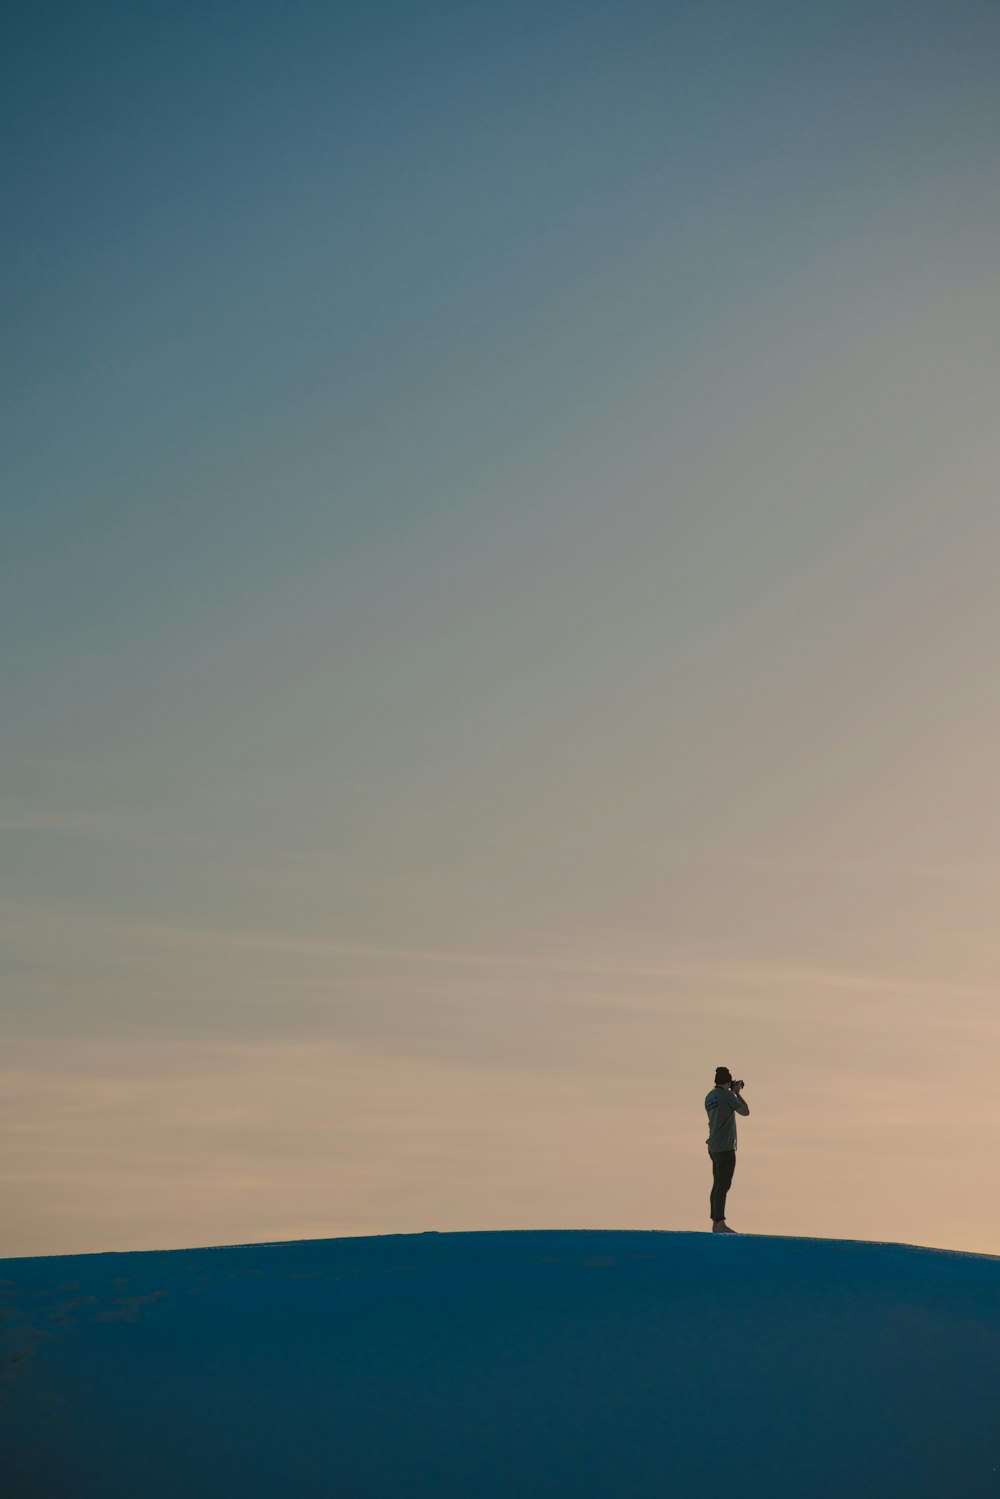 silhouette of man standing on hill during daytime